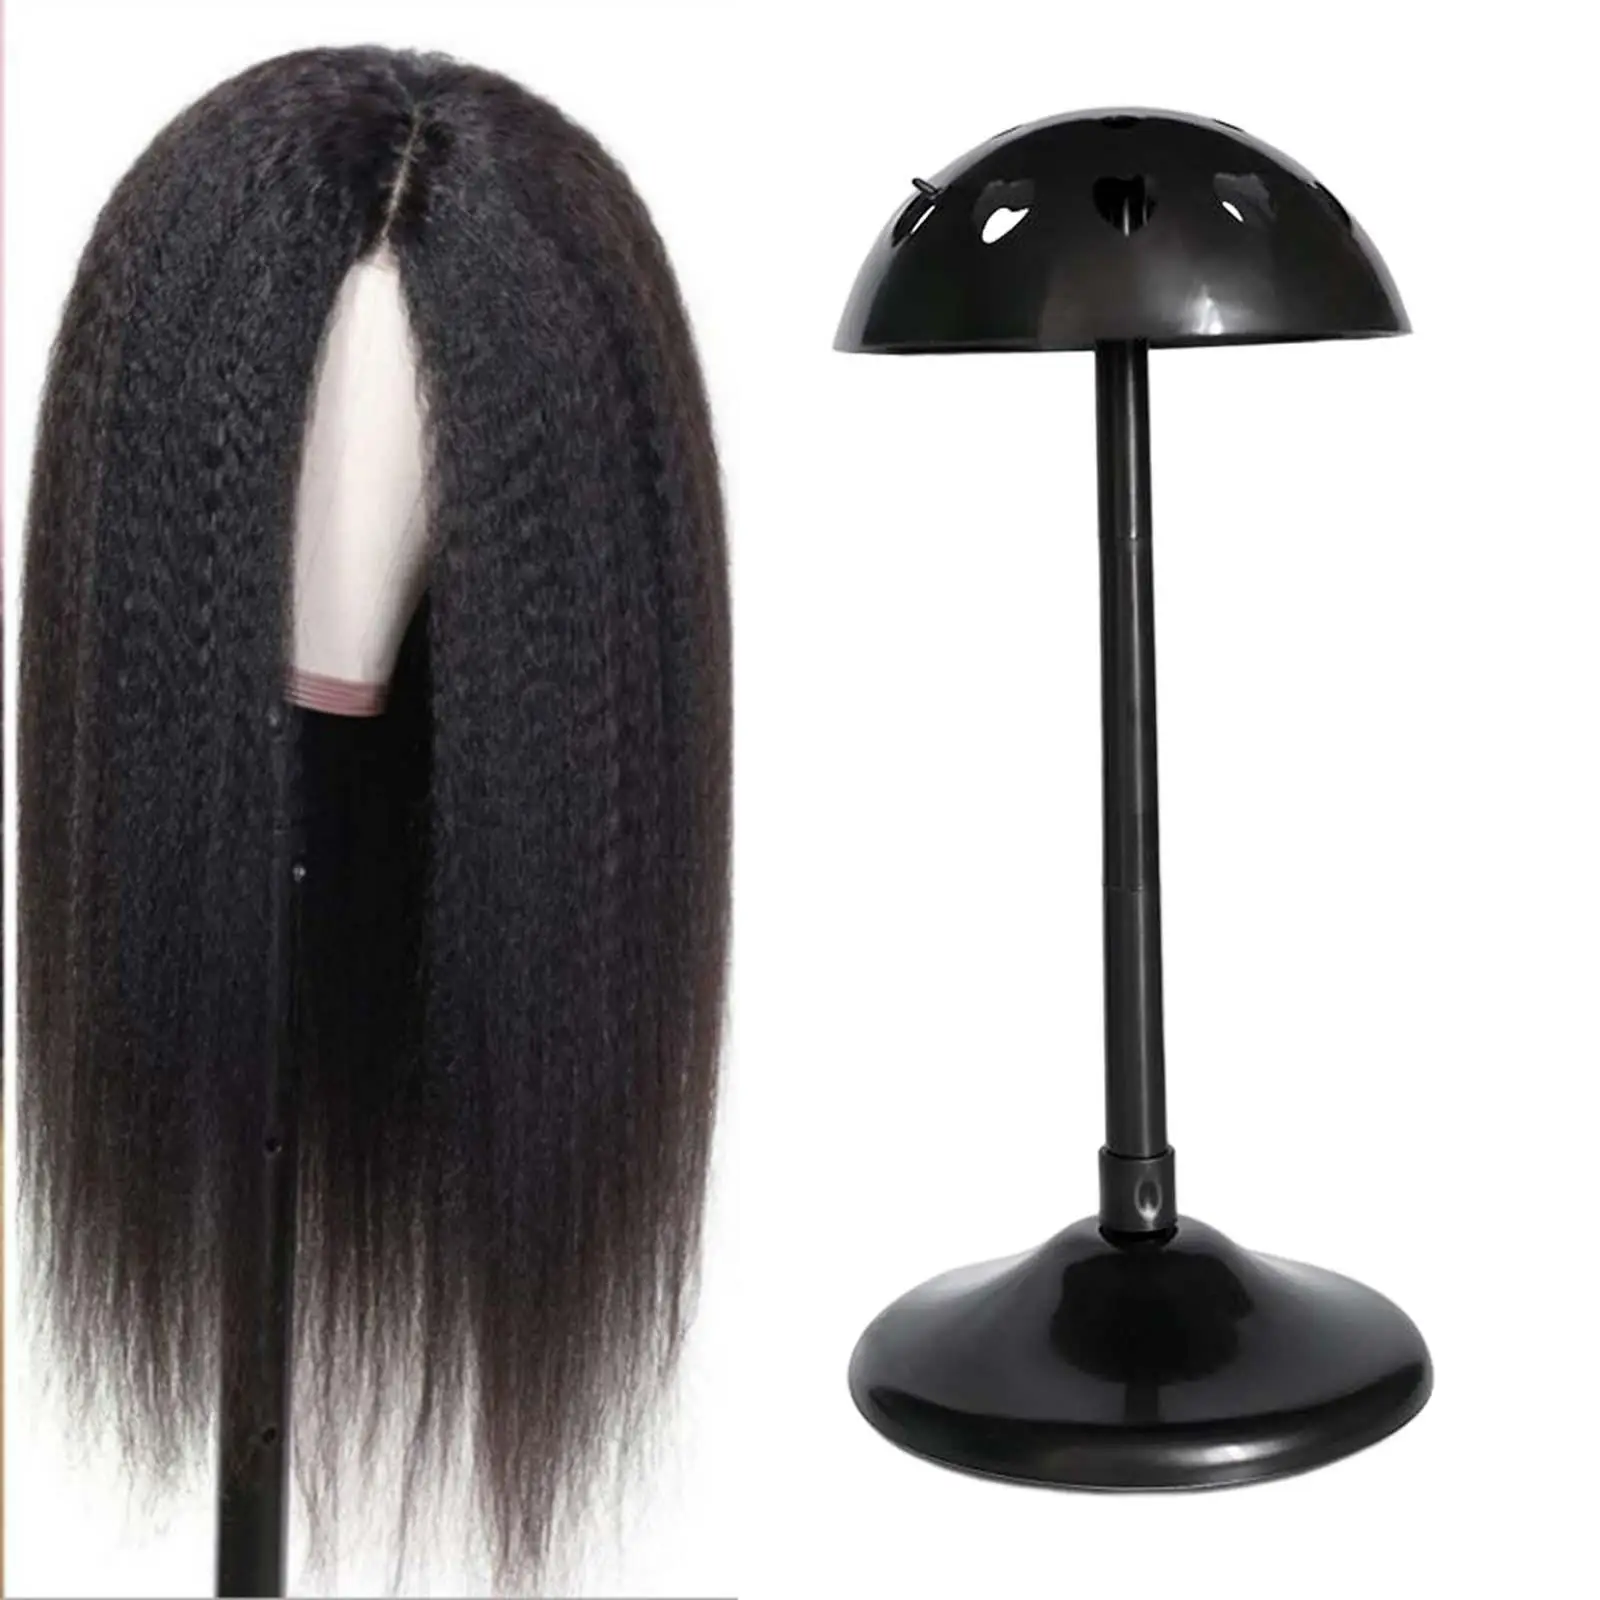 PP Hat Display Stand Adjustable Height for Hair Styling Drying Hat Storage Cute Shape